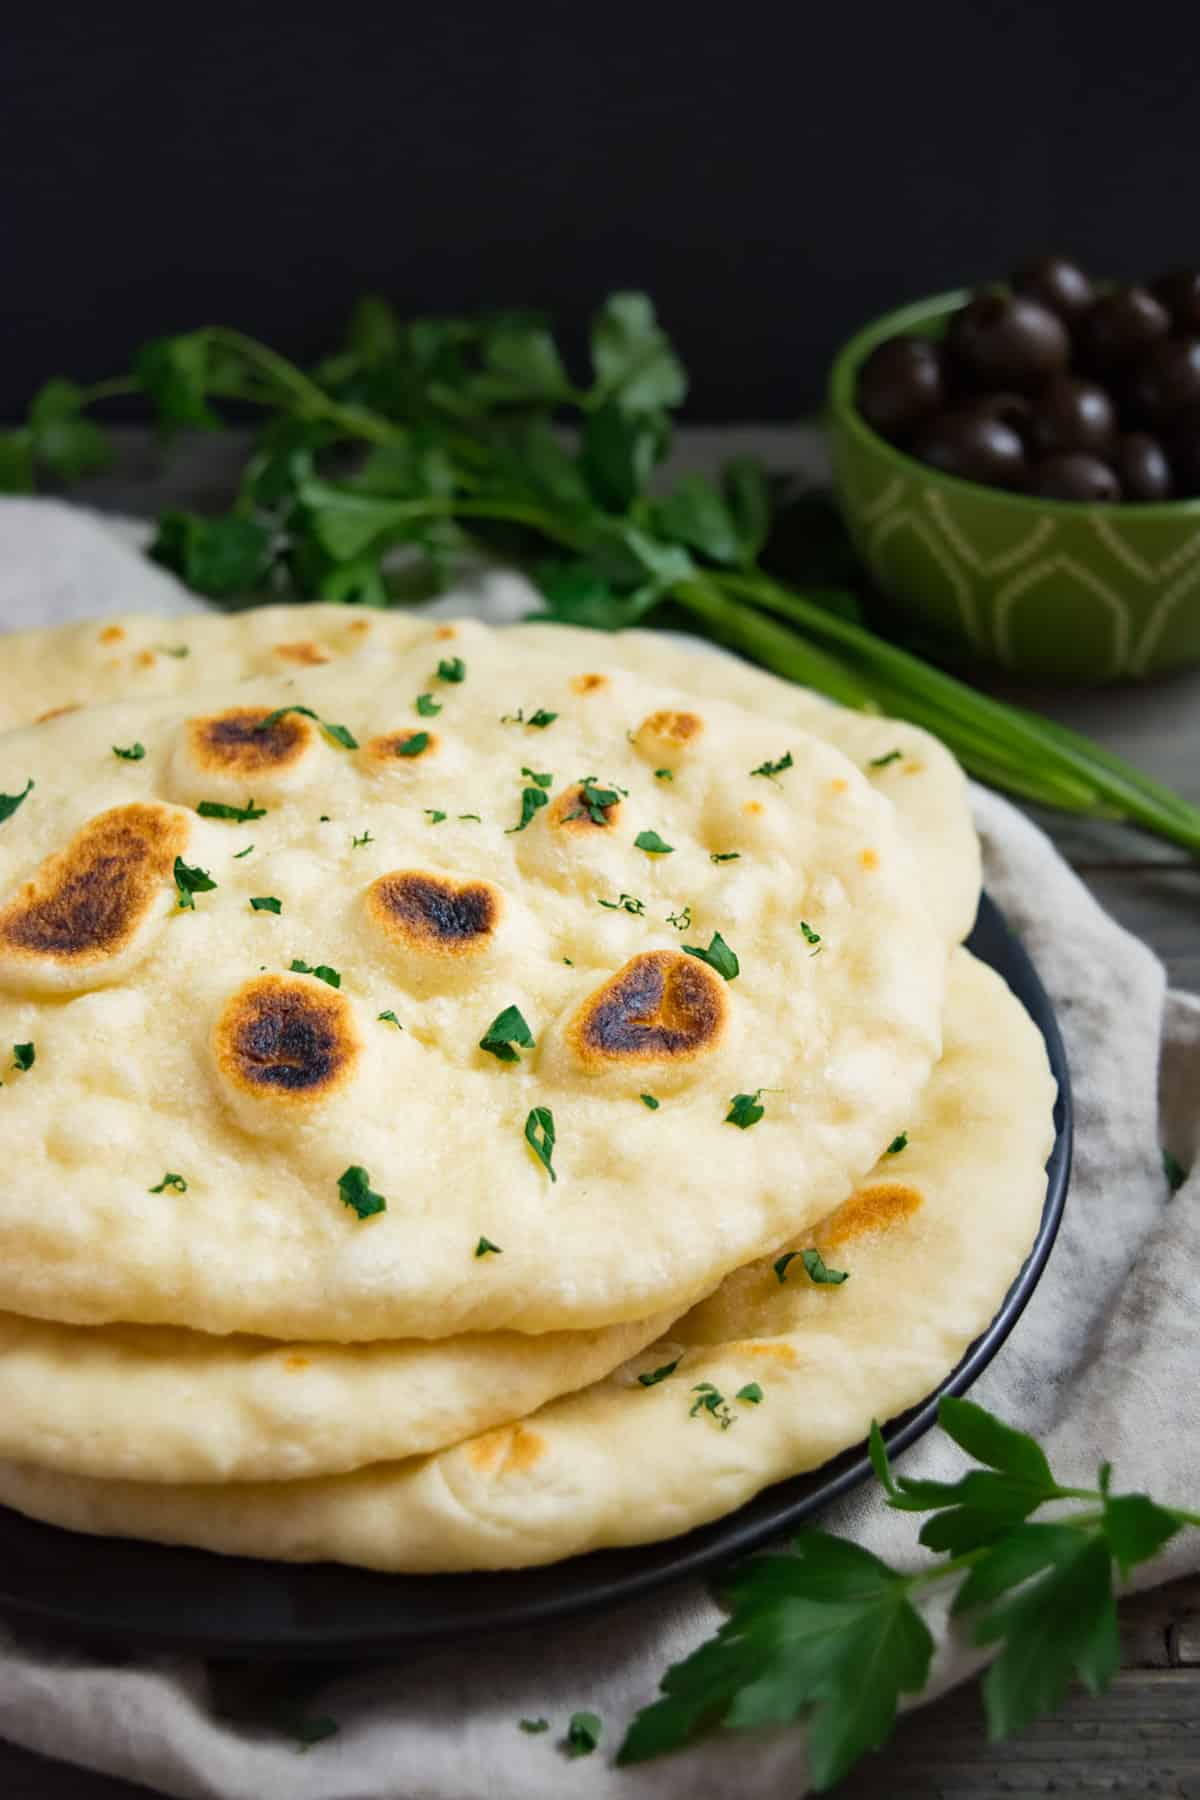 Fresh vegan naan on a black plate with olives and parsley in the background.